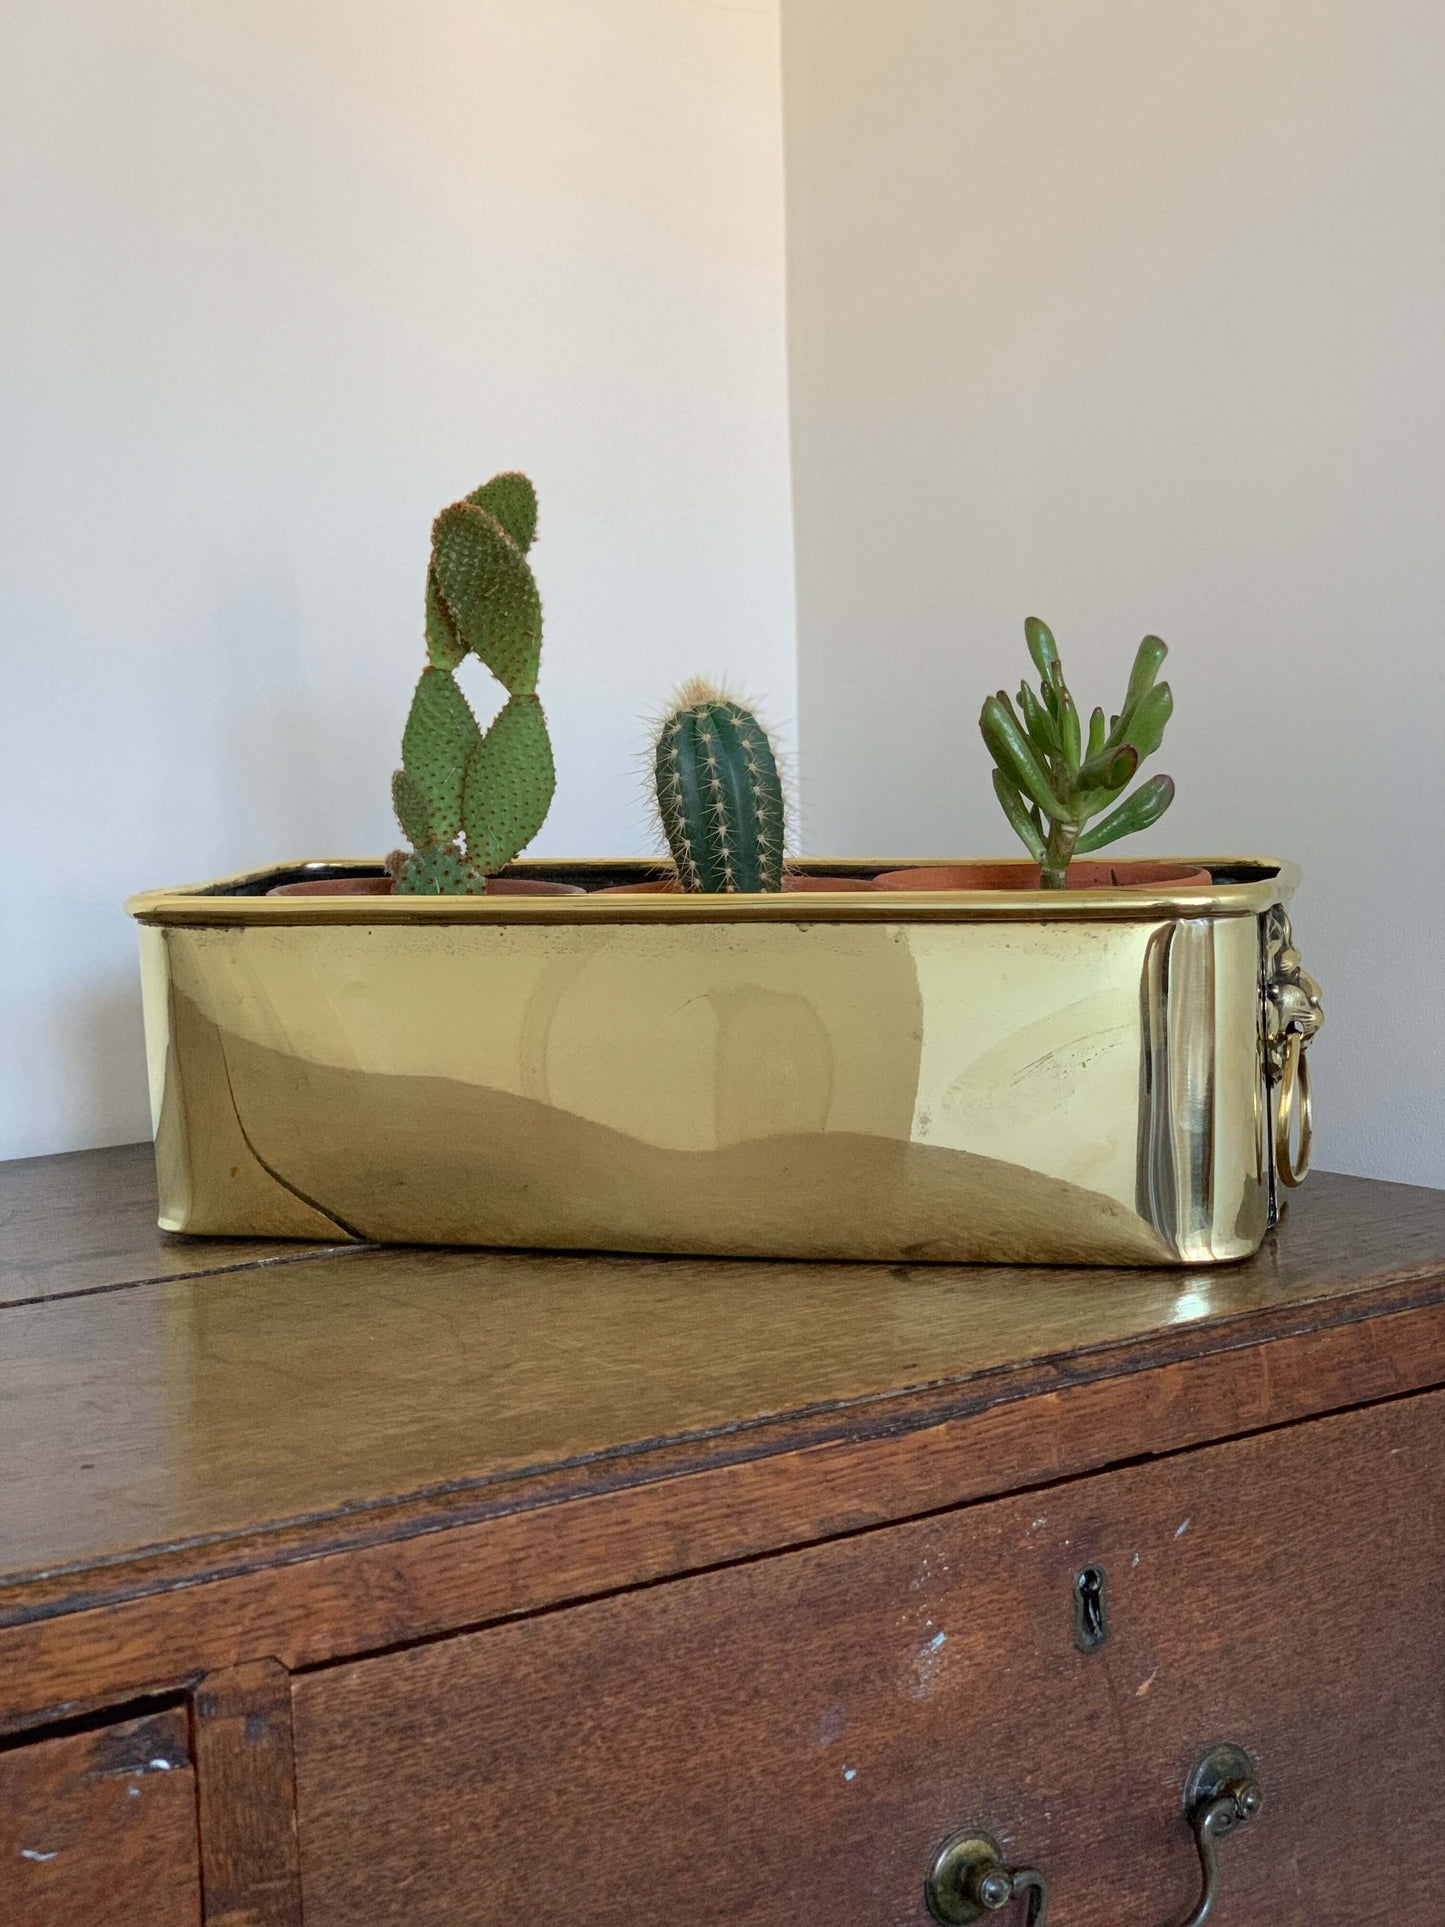 Antique brass and copper planters